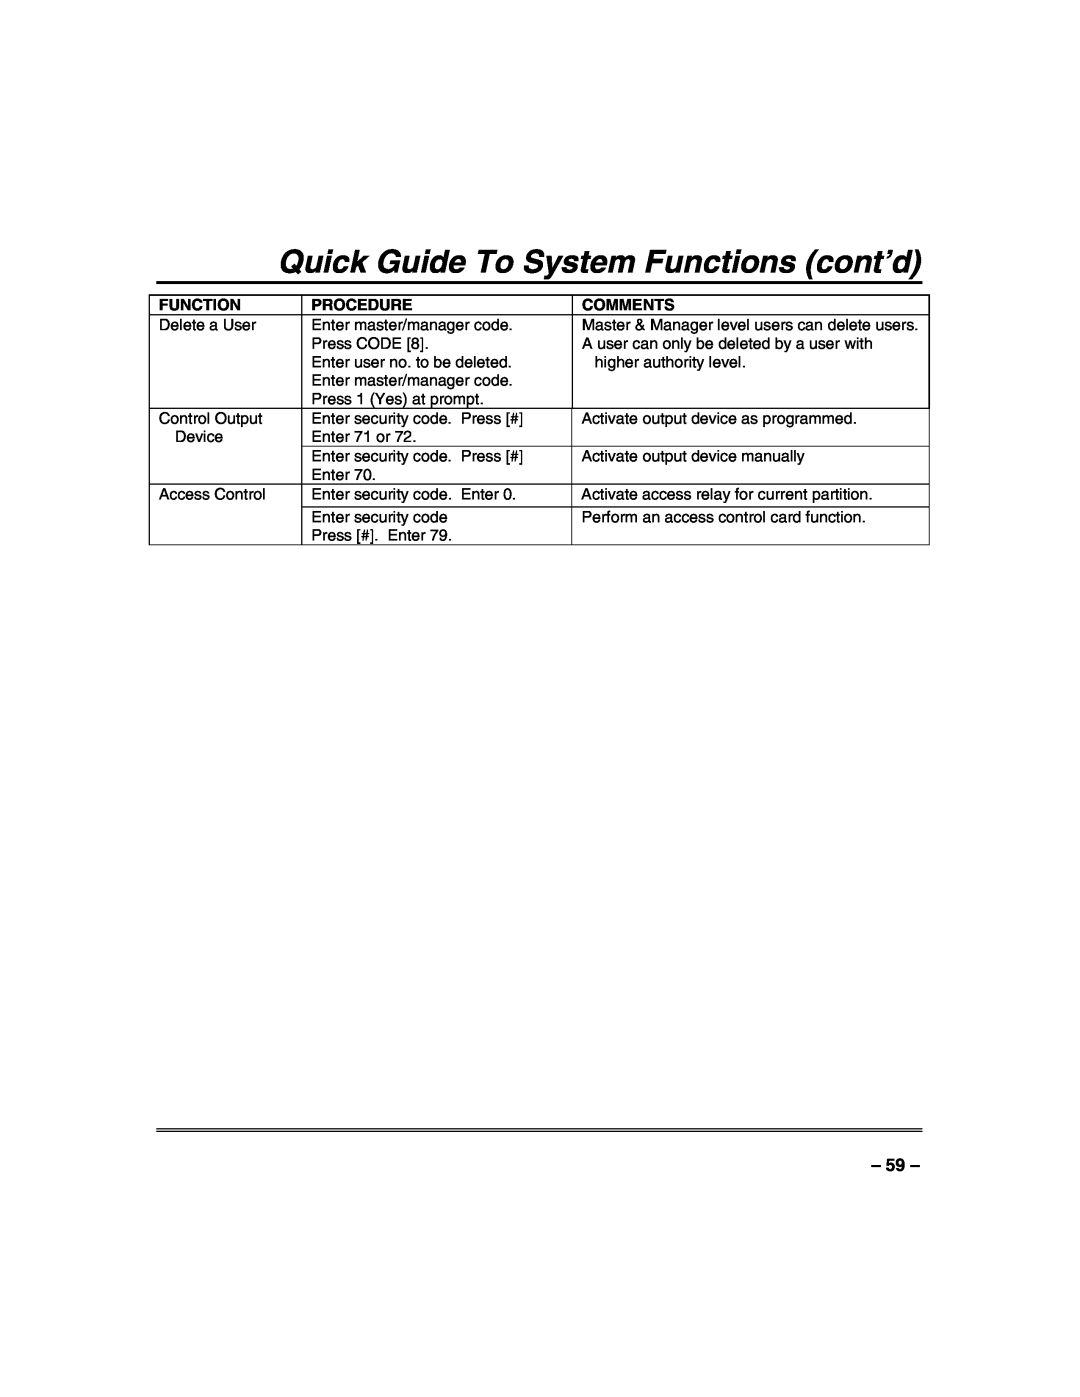 Honeywell VISTA-50PUL manual Quick Guide To System Functions cont’d, Procedure, Comments 